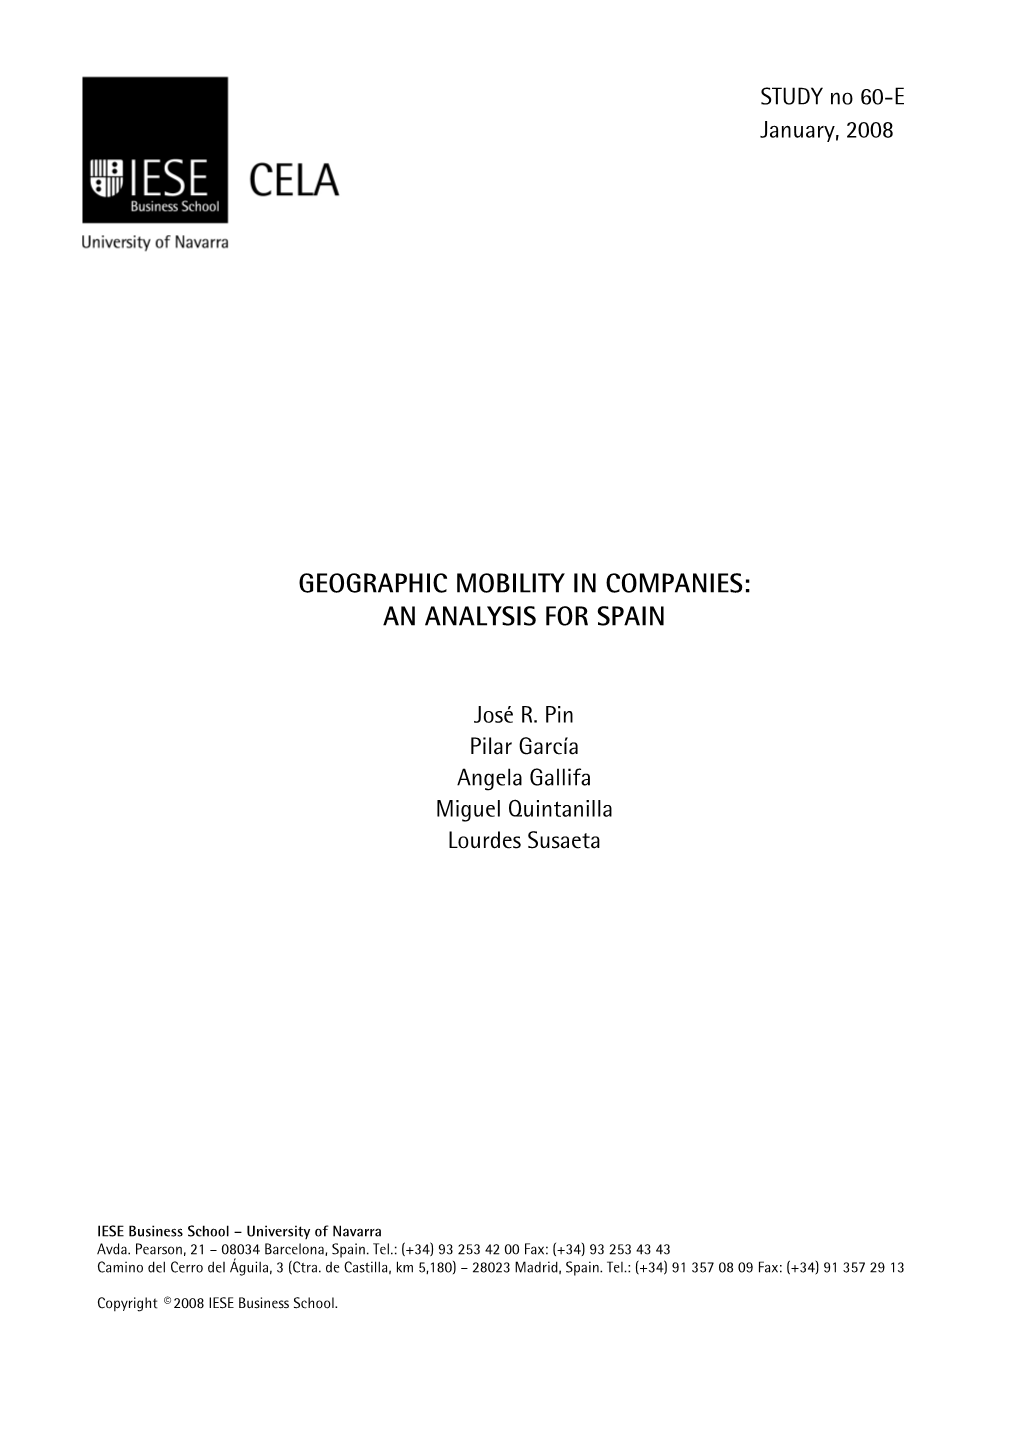 Geographic Mobility in Companies: an Analysis for Spain